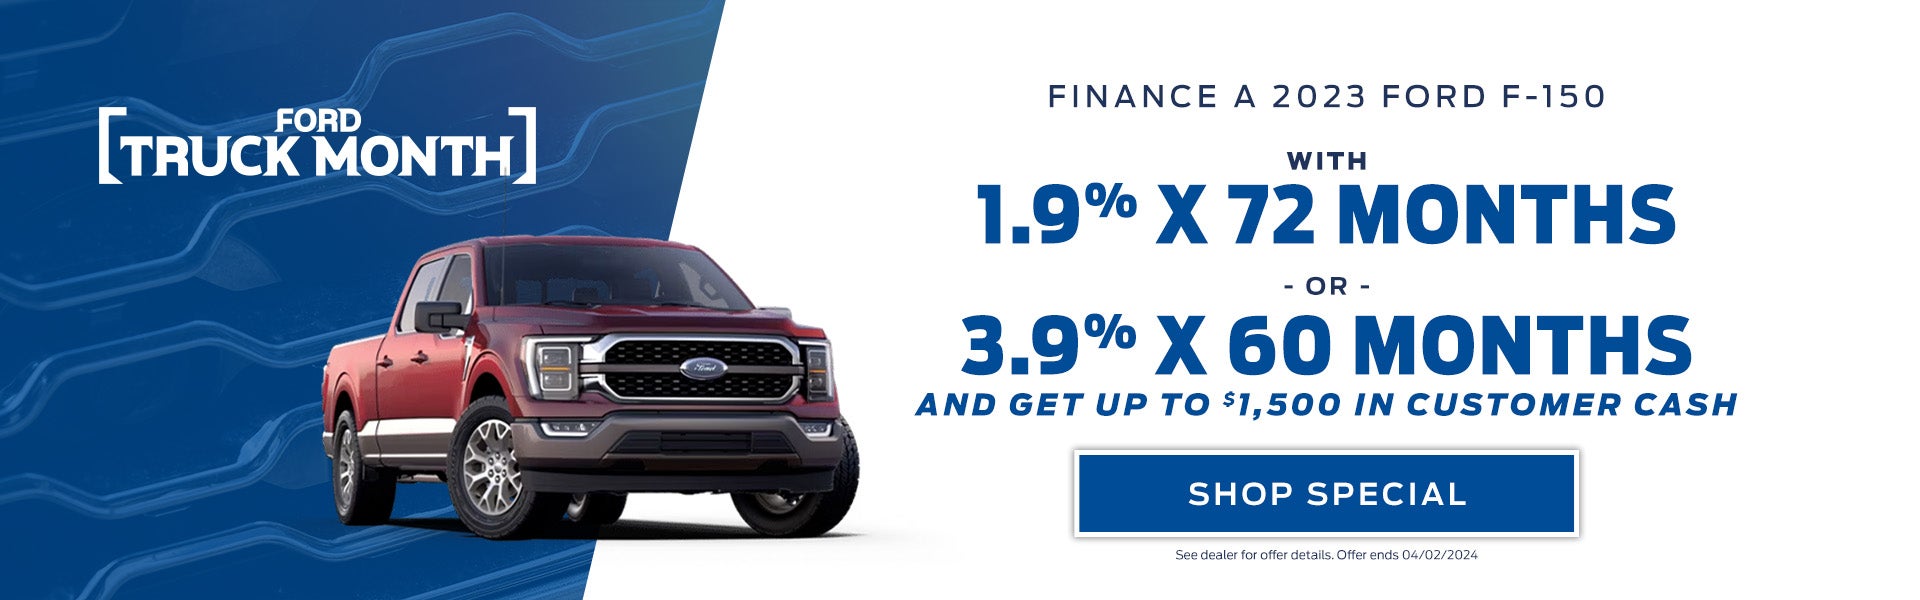 Finance a 2023 Ford F-150 with 1.9% X 72 Months